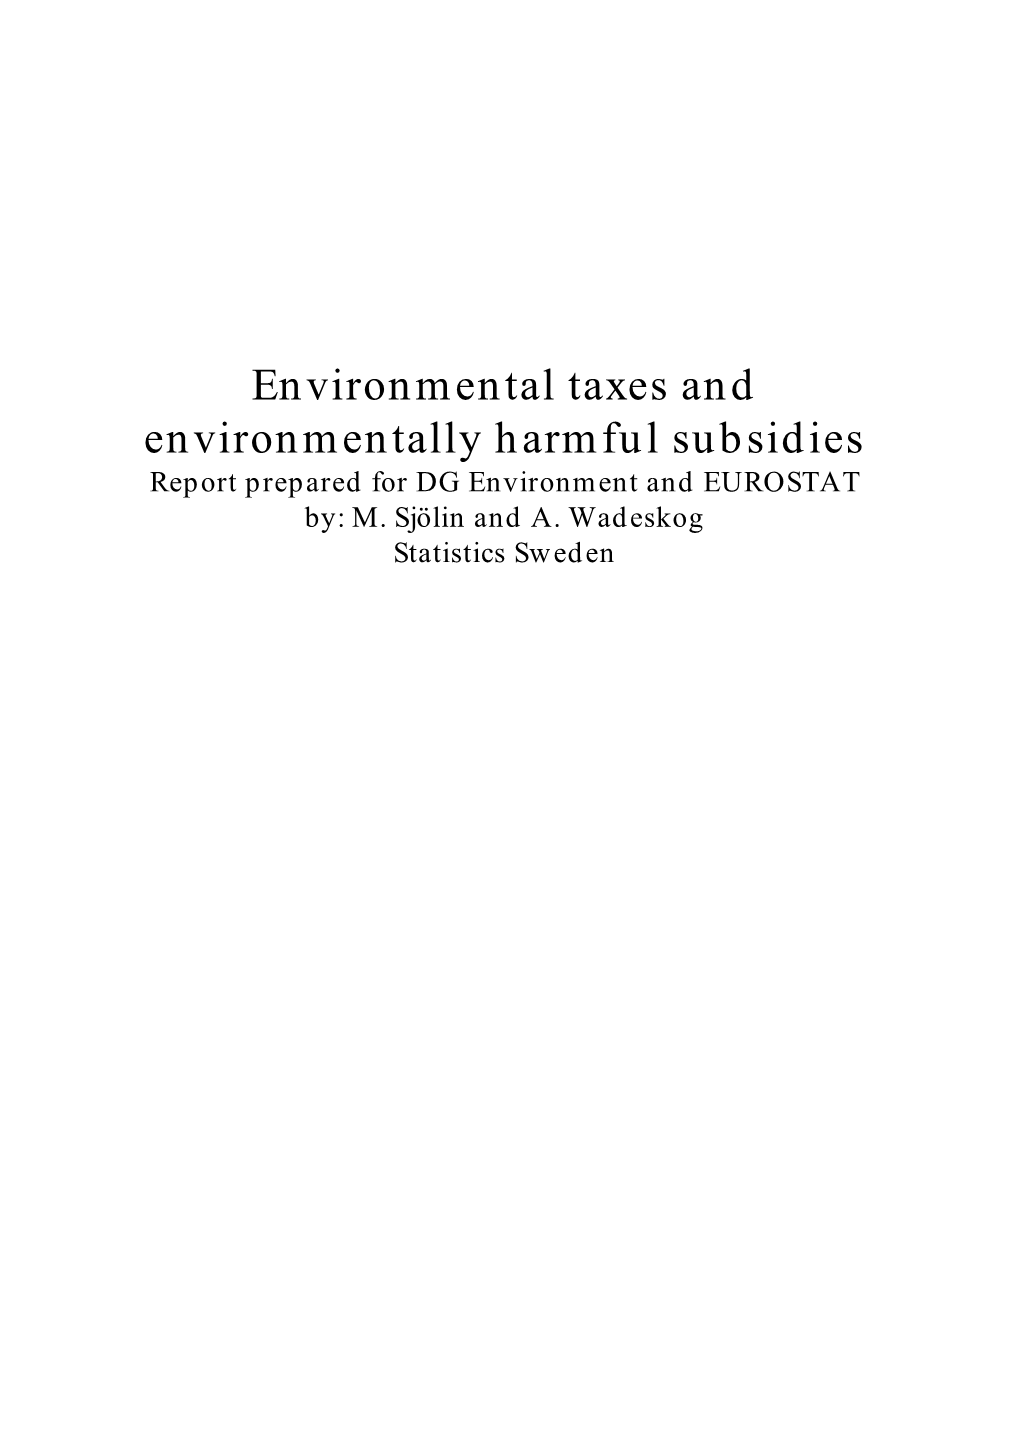 Environmental Taxes and Environmentally Harmful Subsidies Report Prepared for DG Environment and EUROSTAT By: M